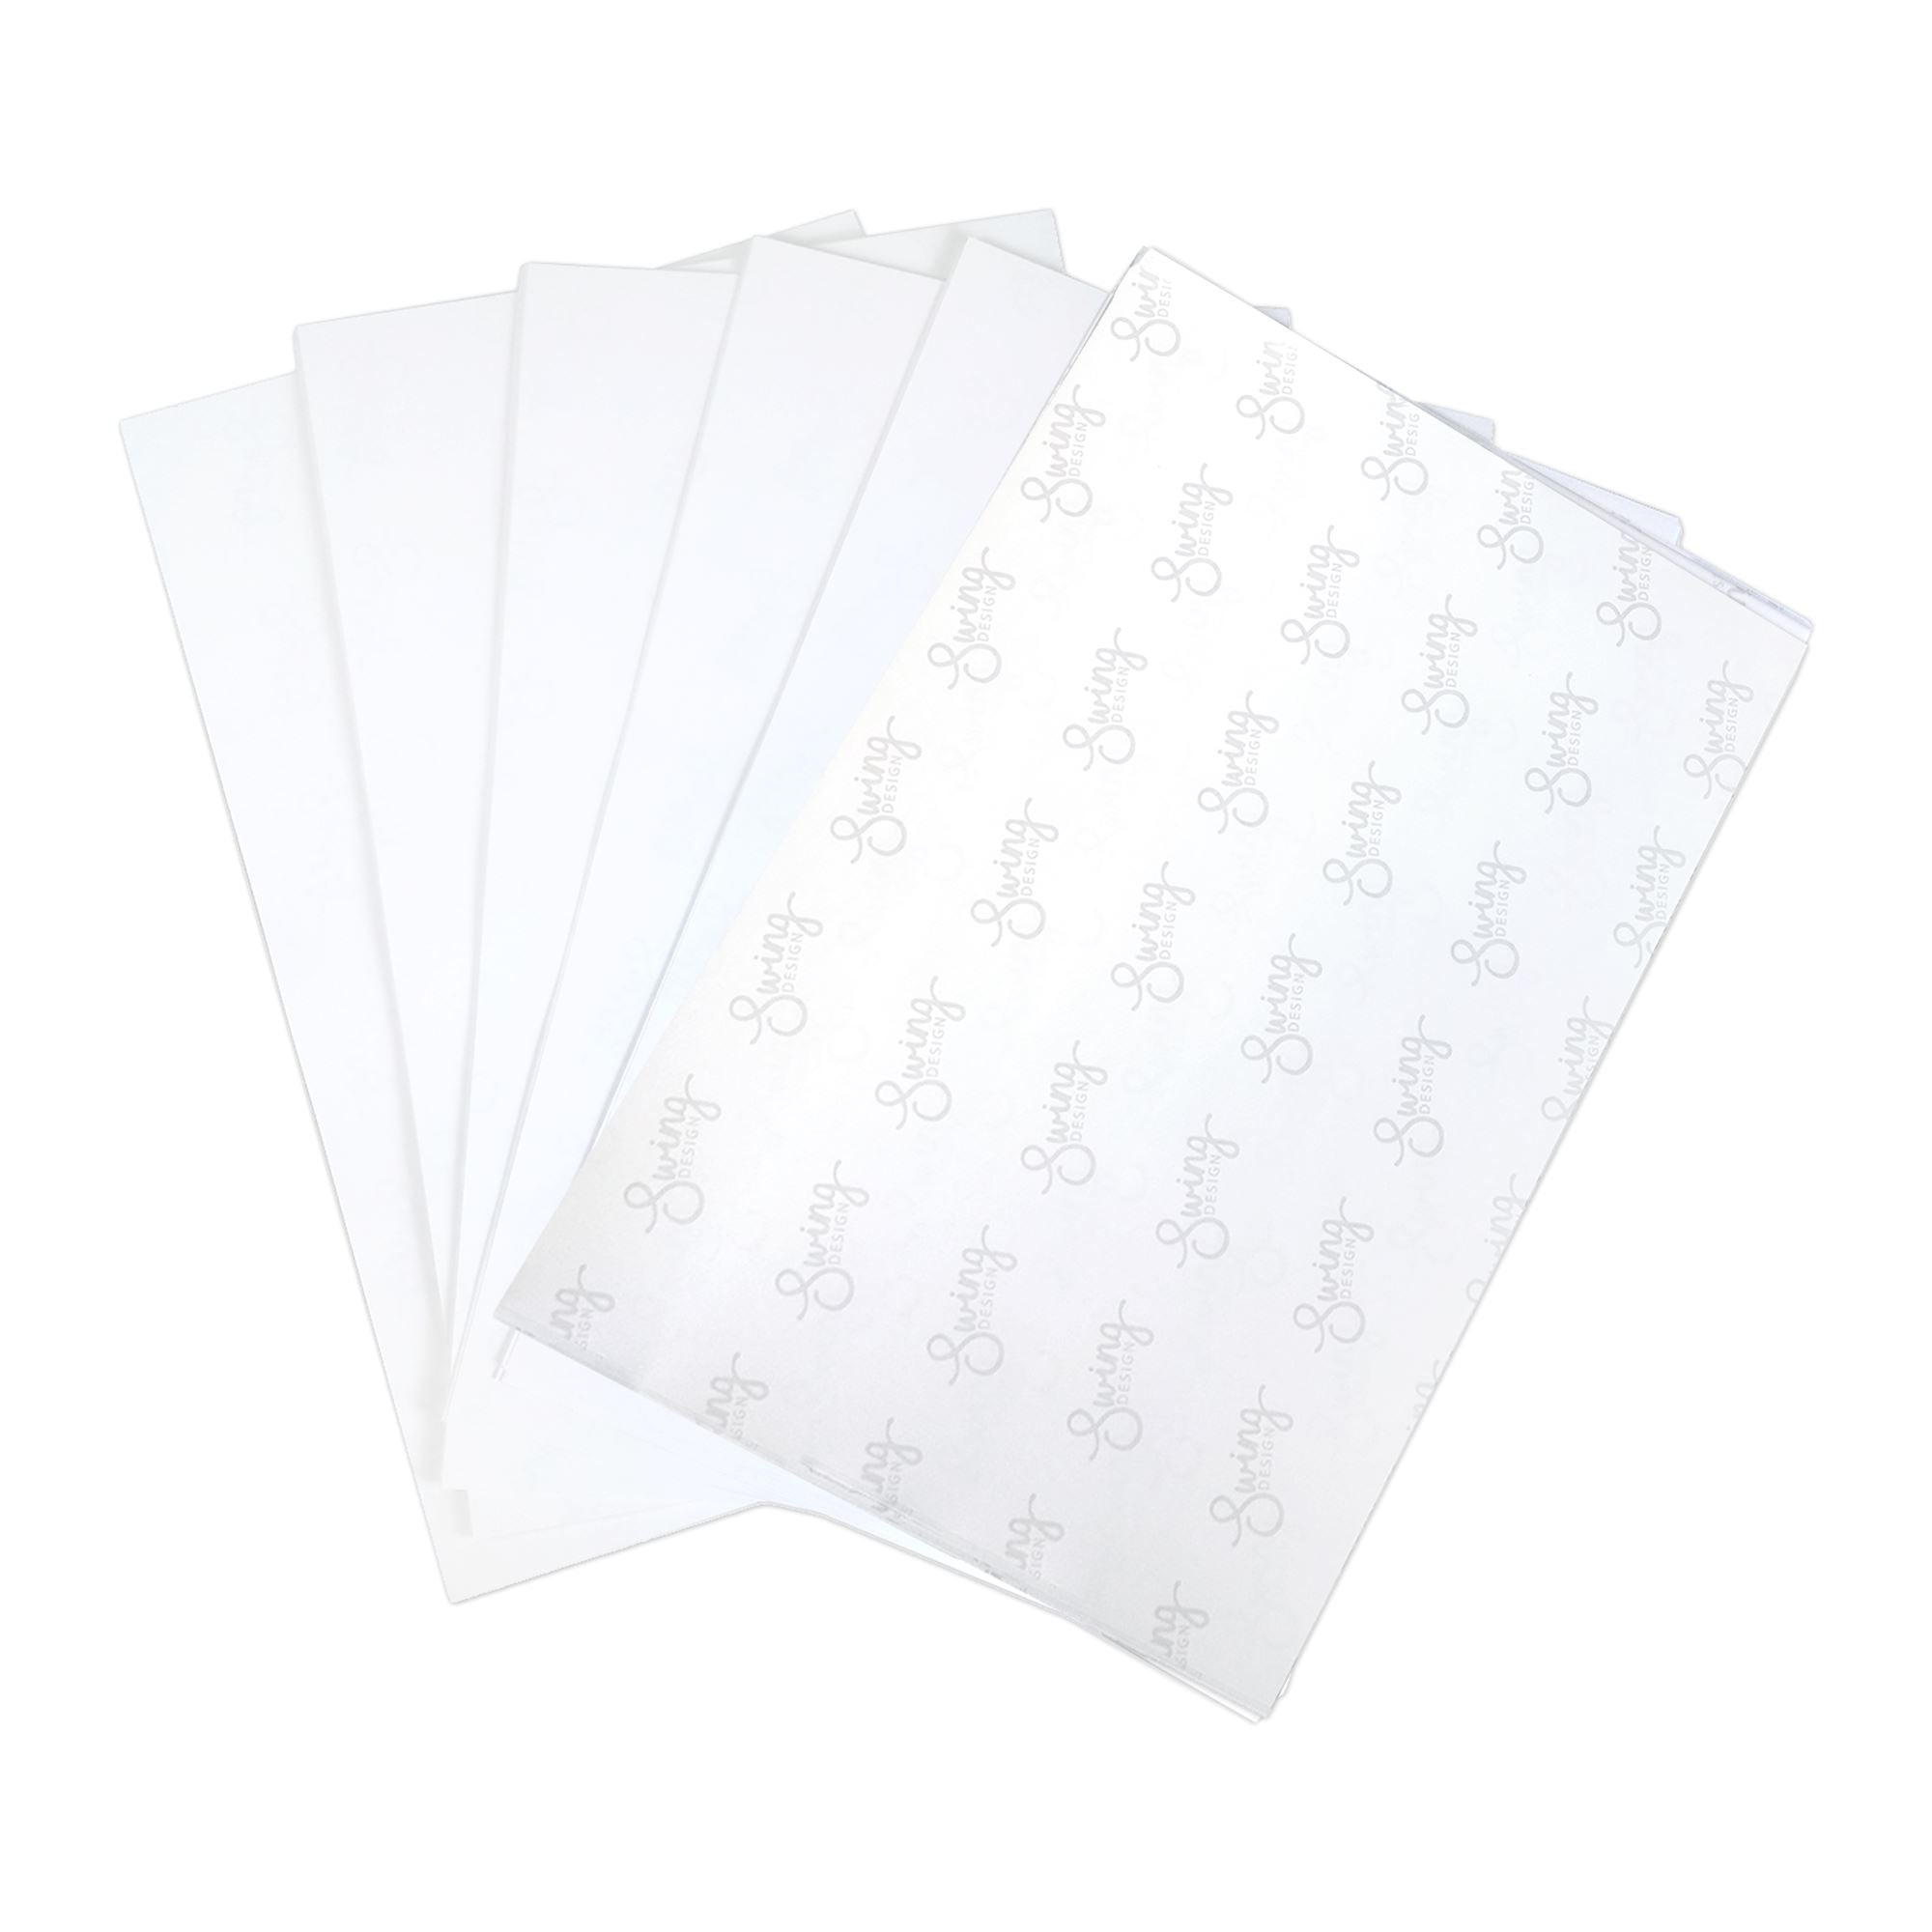 Sublimation Paper - 8.5 x 14 Inch 150 Sheets